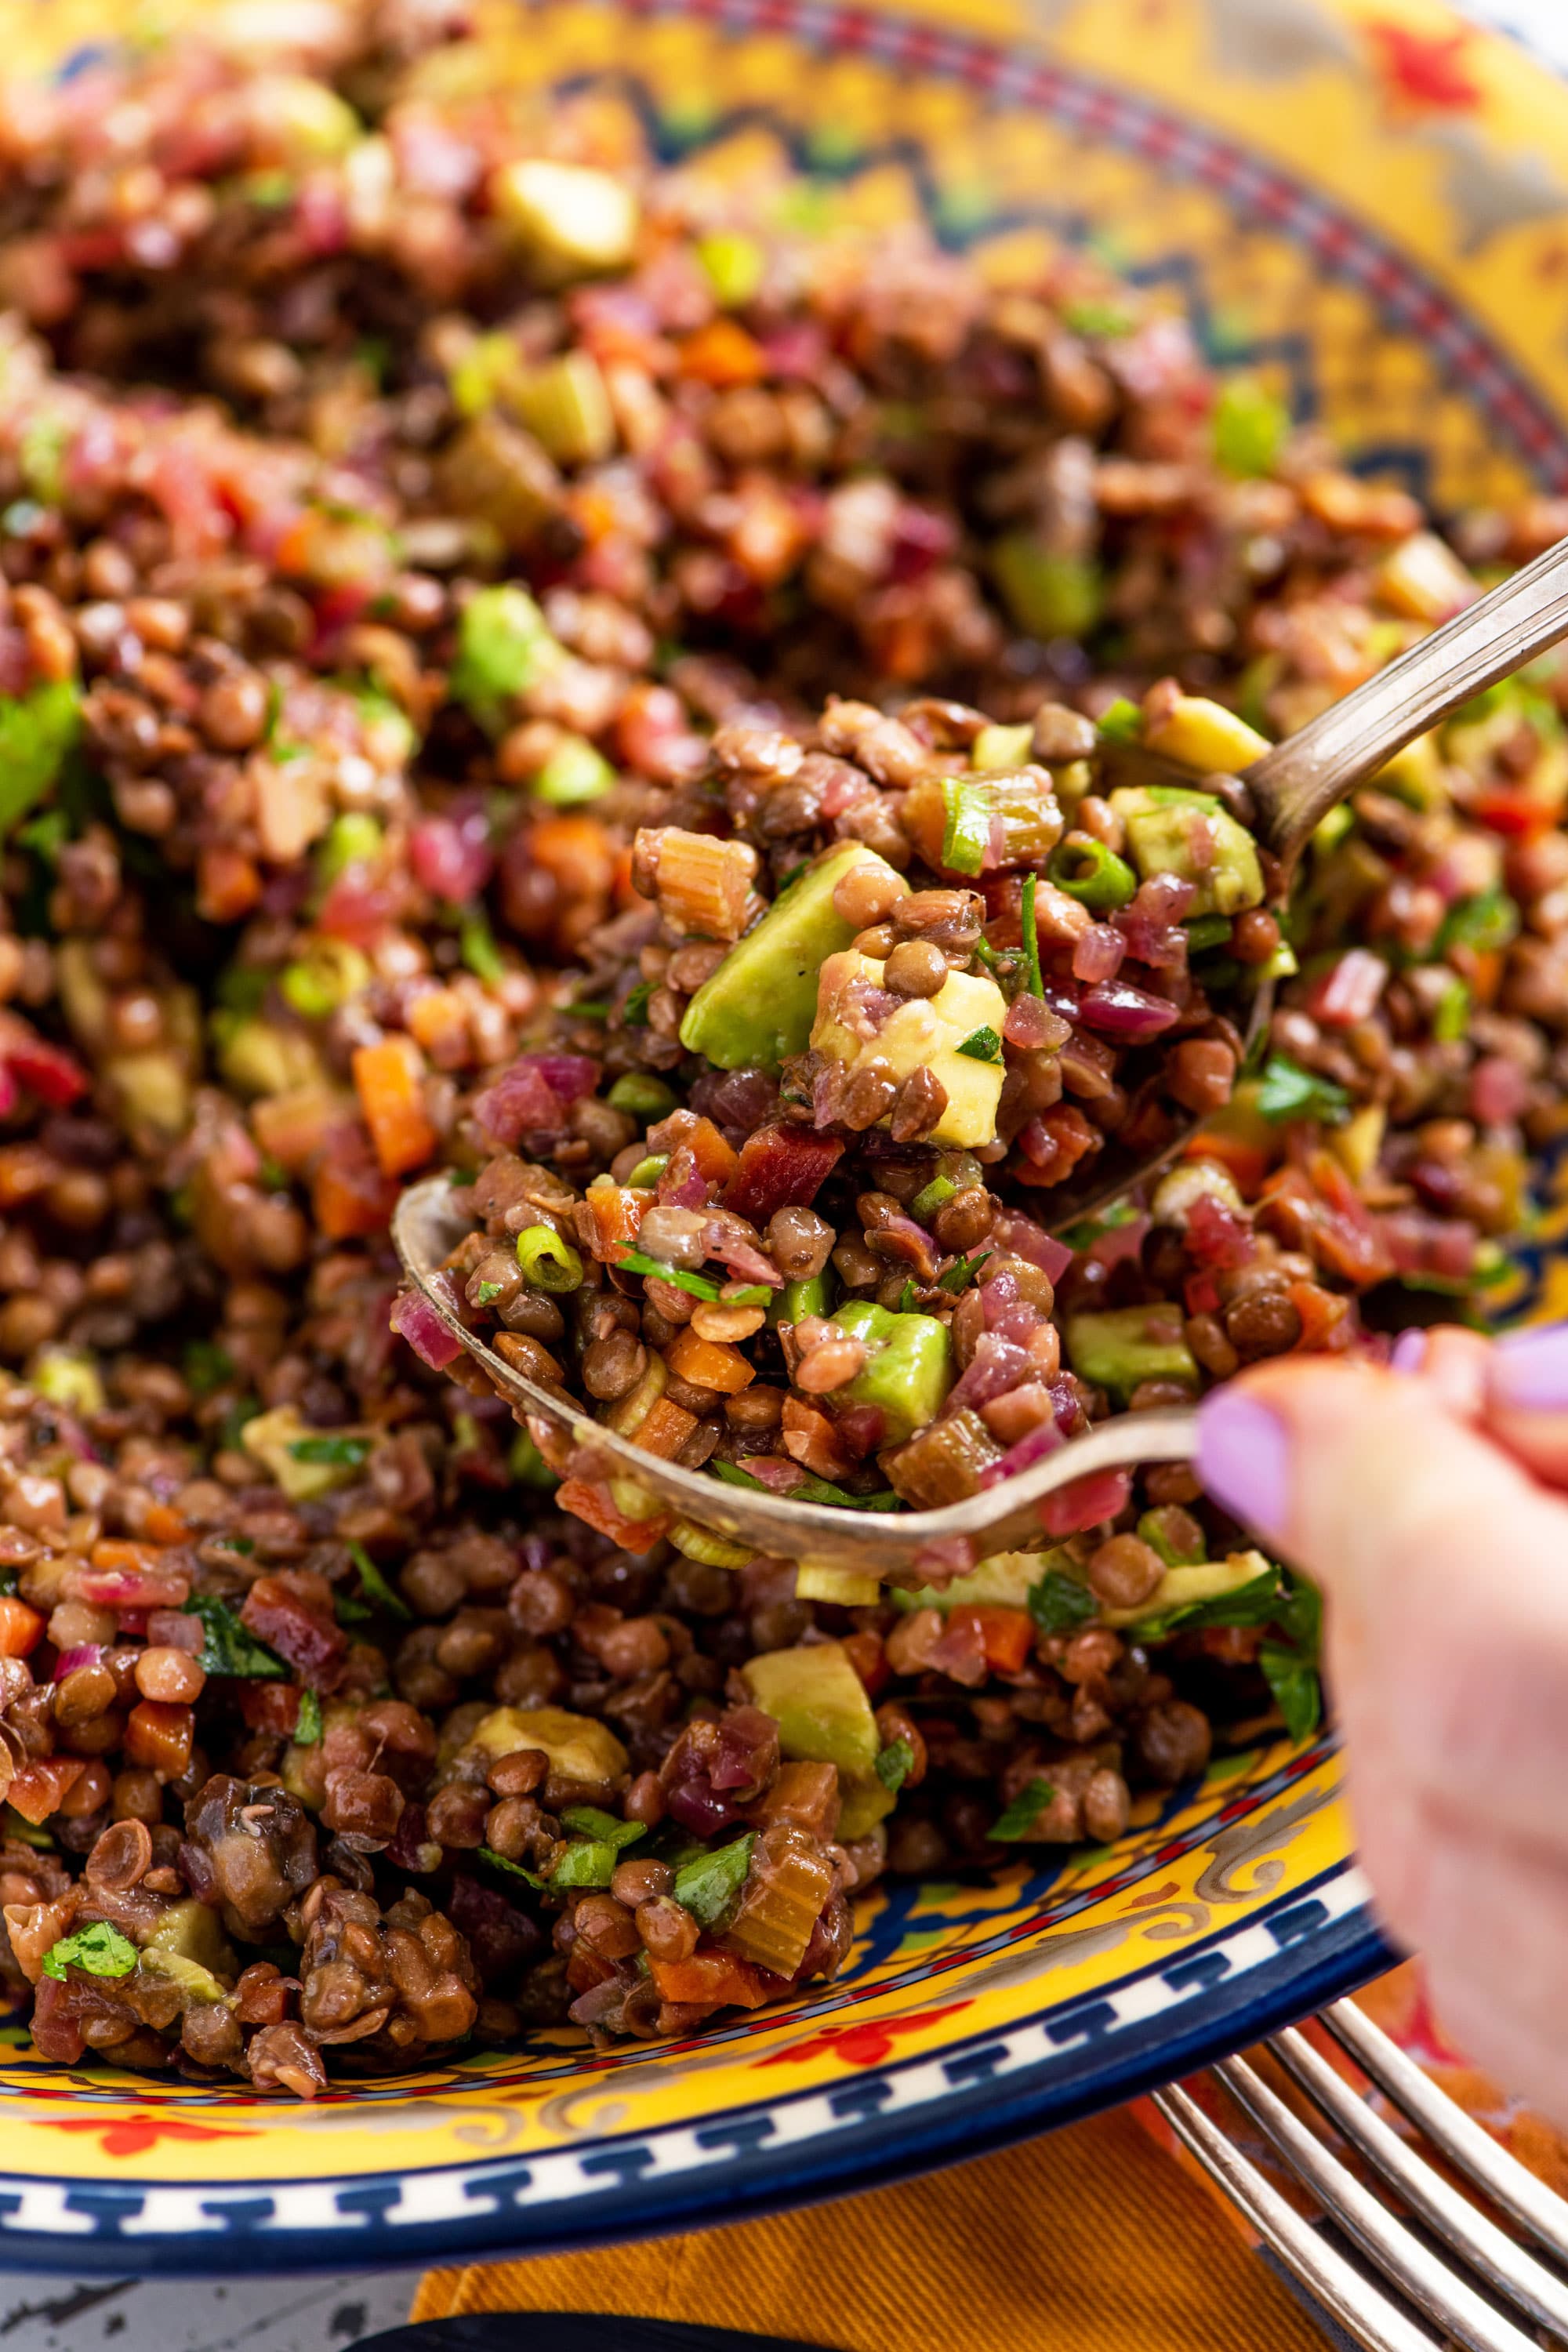 Spoons scooping Lentil, Red Onion and Avocado Salad.